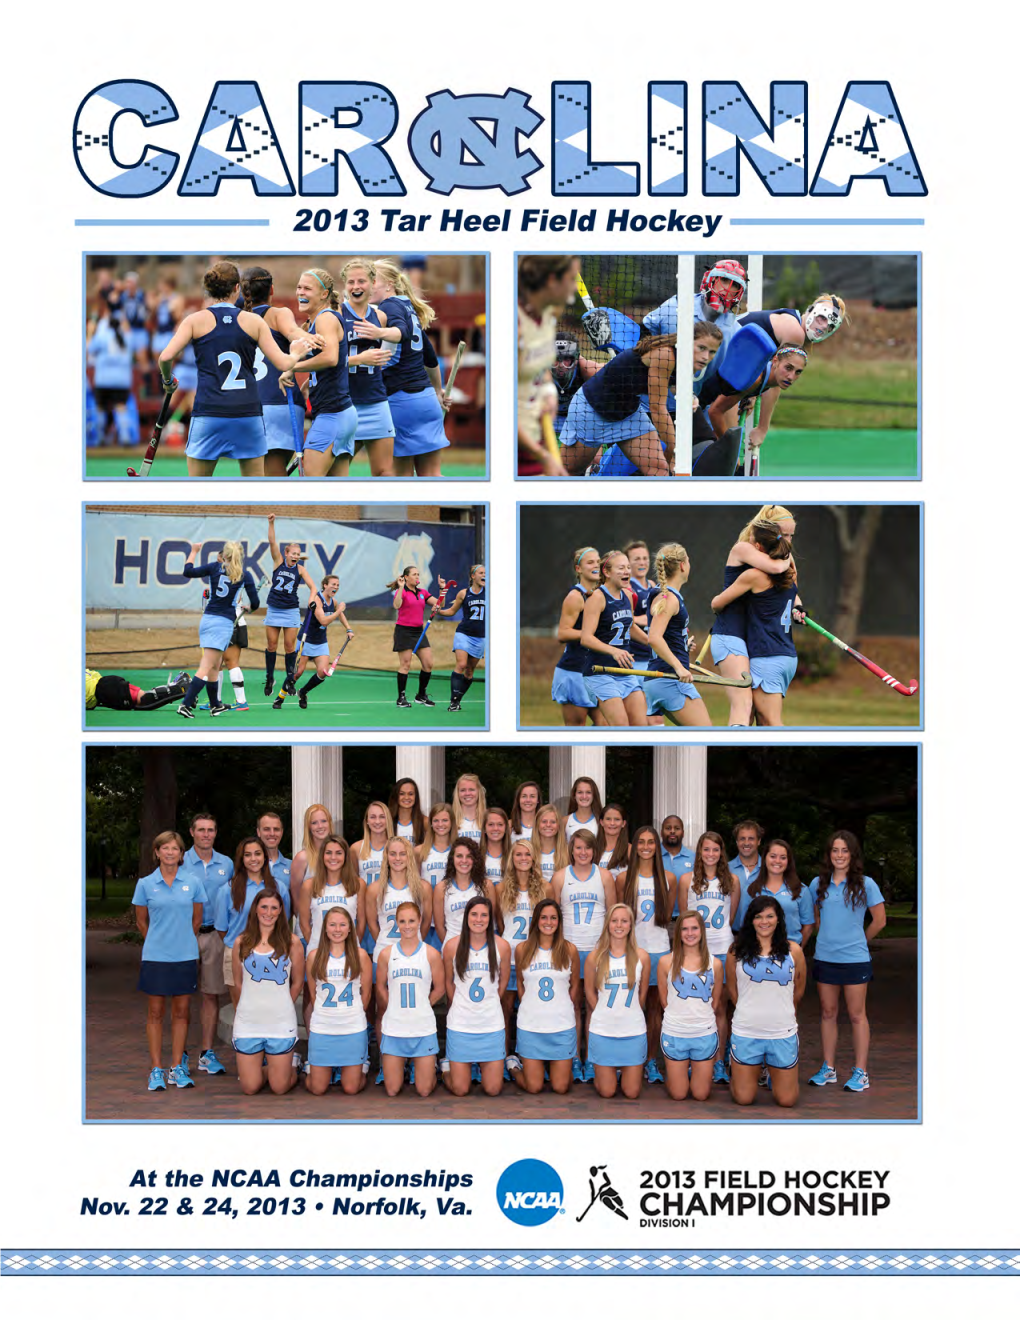 2013 UNC Field Hockey Roster # Name Pos